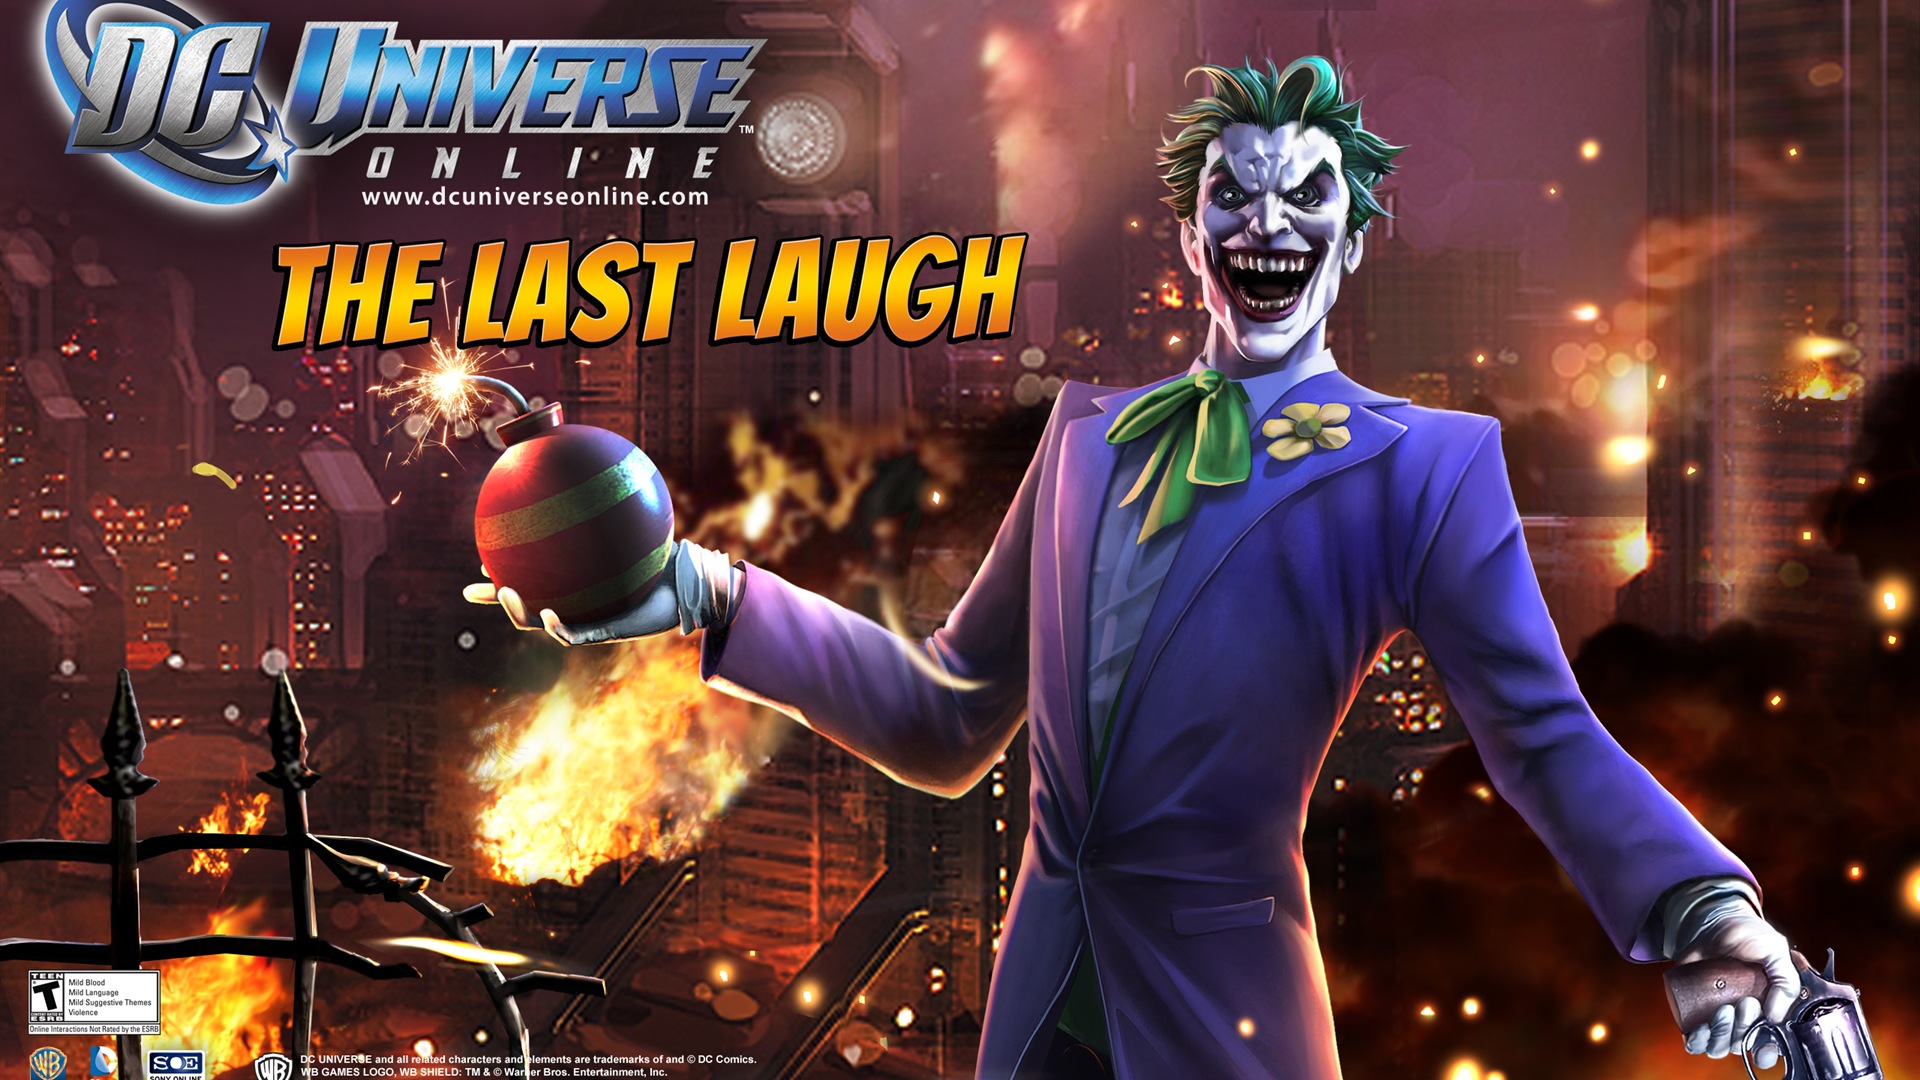 DC Universe Online HD game wallpapers #27 - 1920x1080